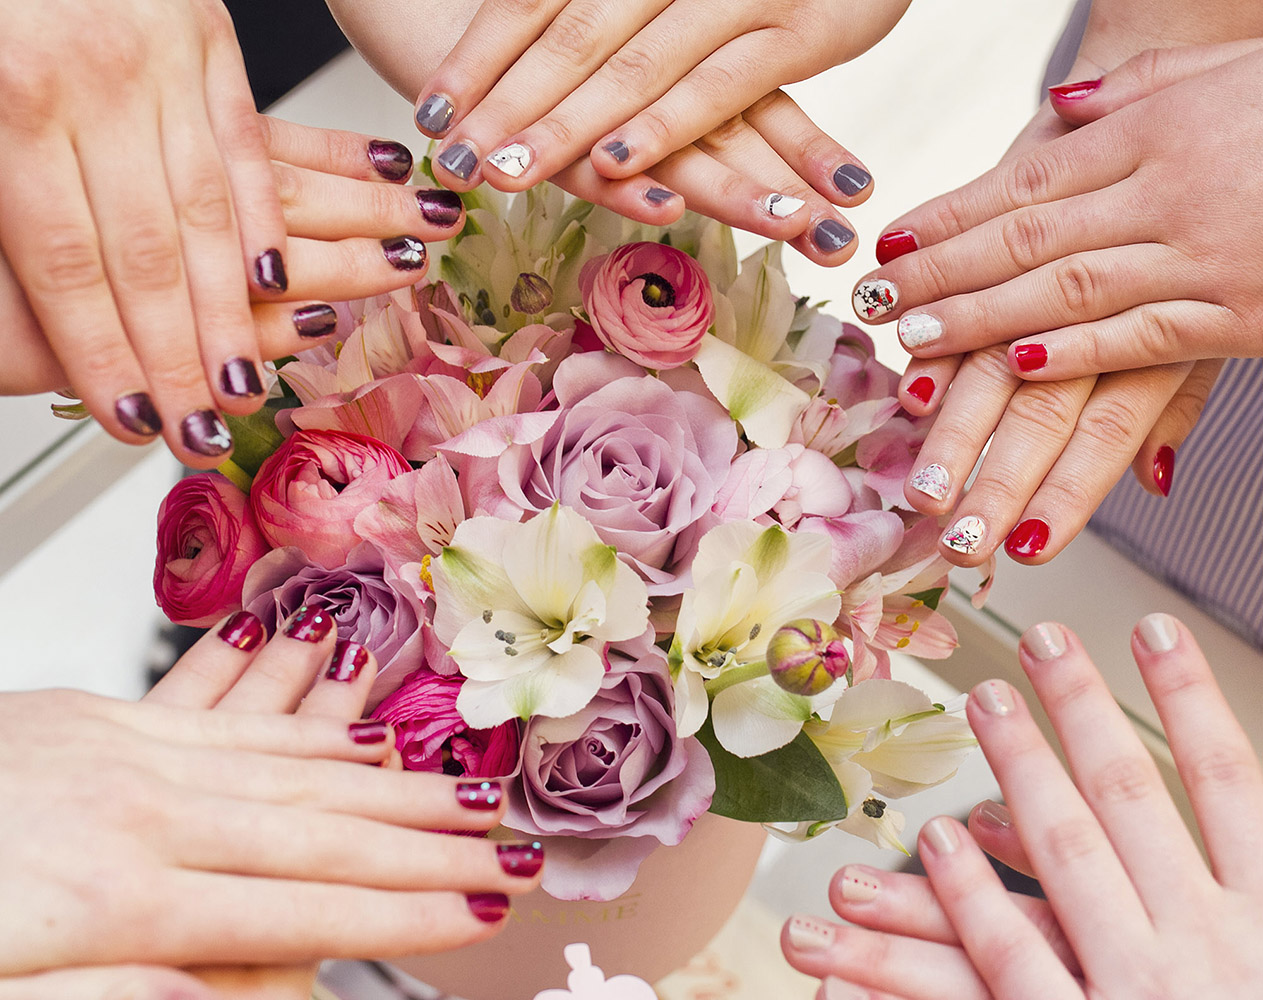 Hands with painted nails with flowers on the background